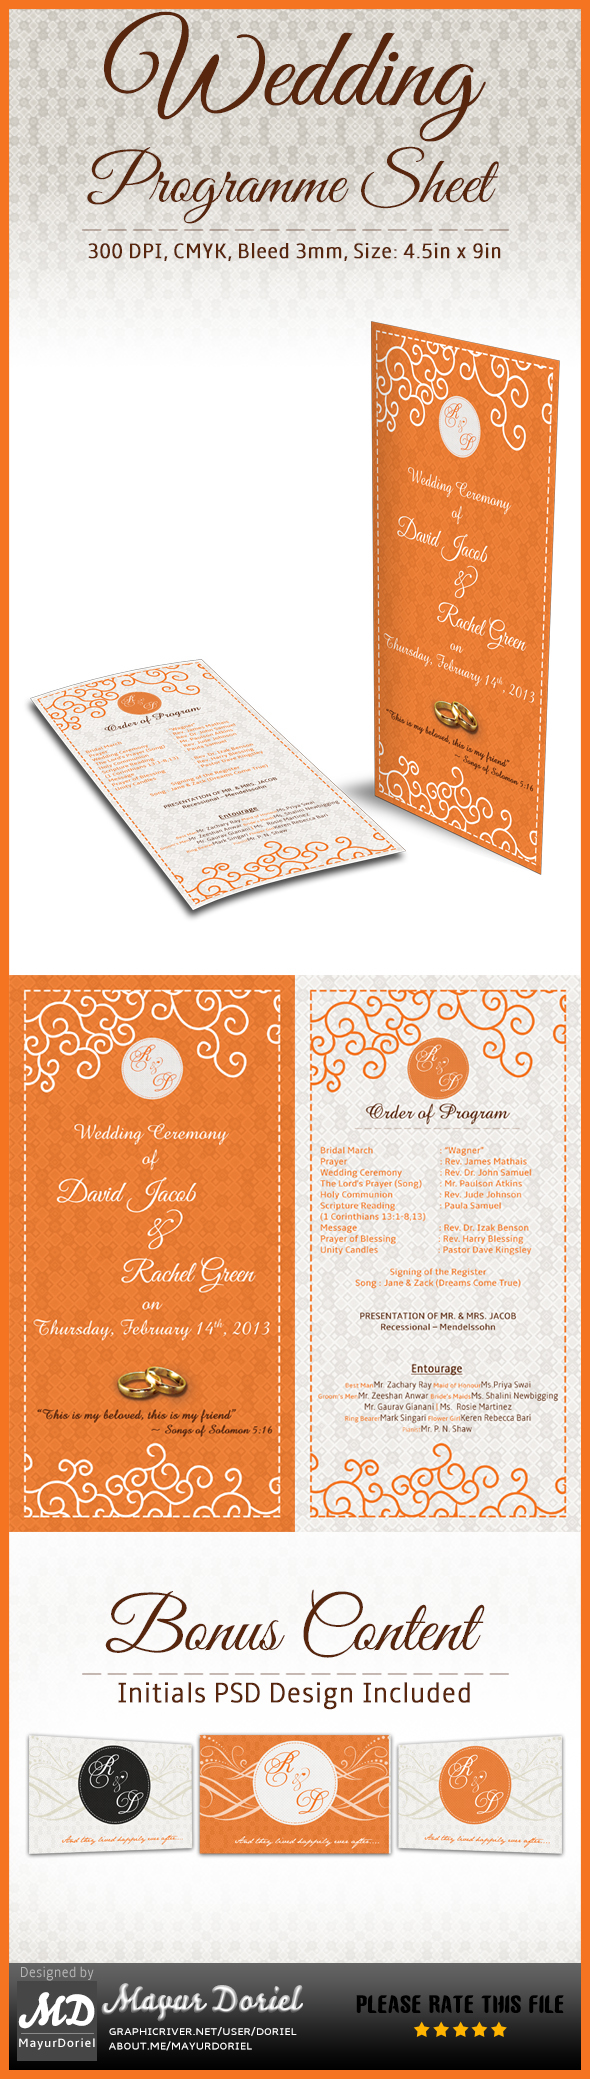 wedding programme schedule sale template marriage rings i do graphic river Love party Event simple elegant